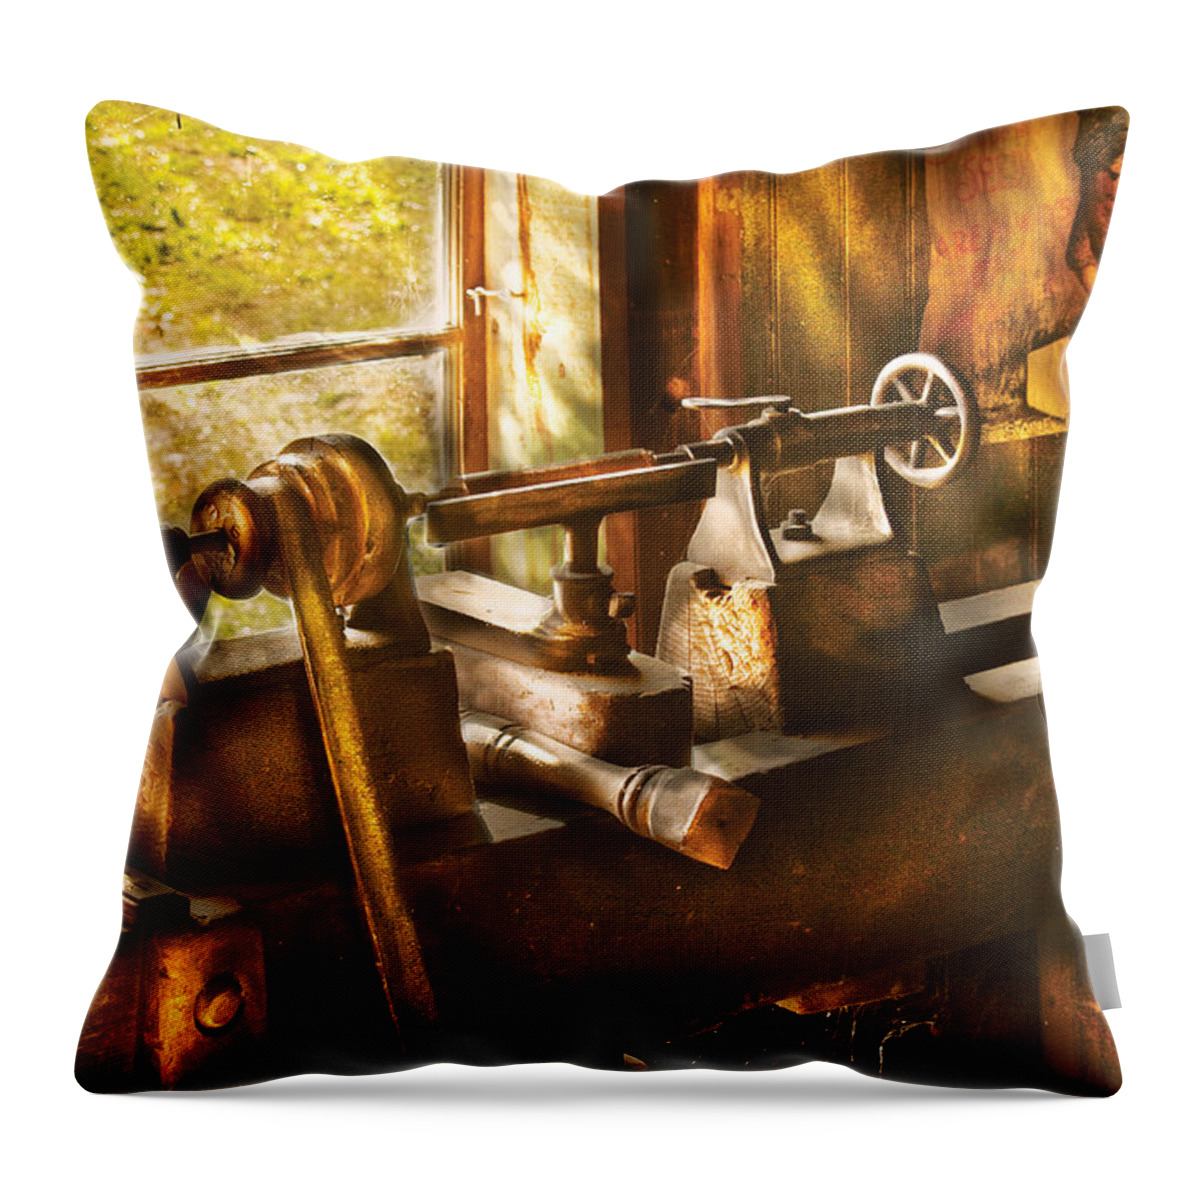 Woodworker Throw Pillow featuring the photograph Woodworker - An Old Lathe by Mike Savad